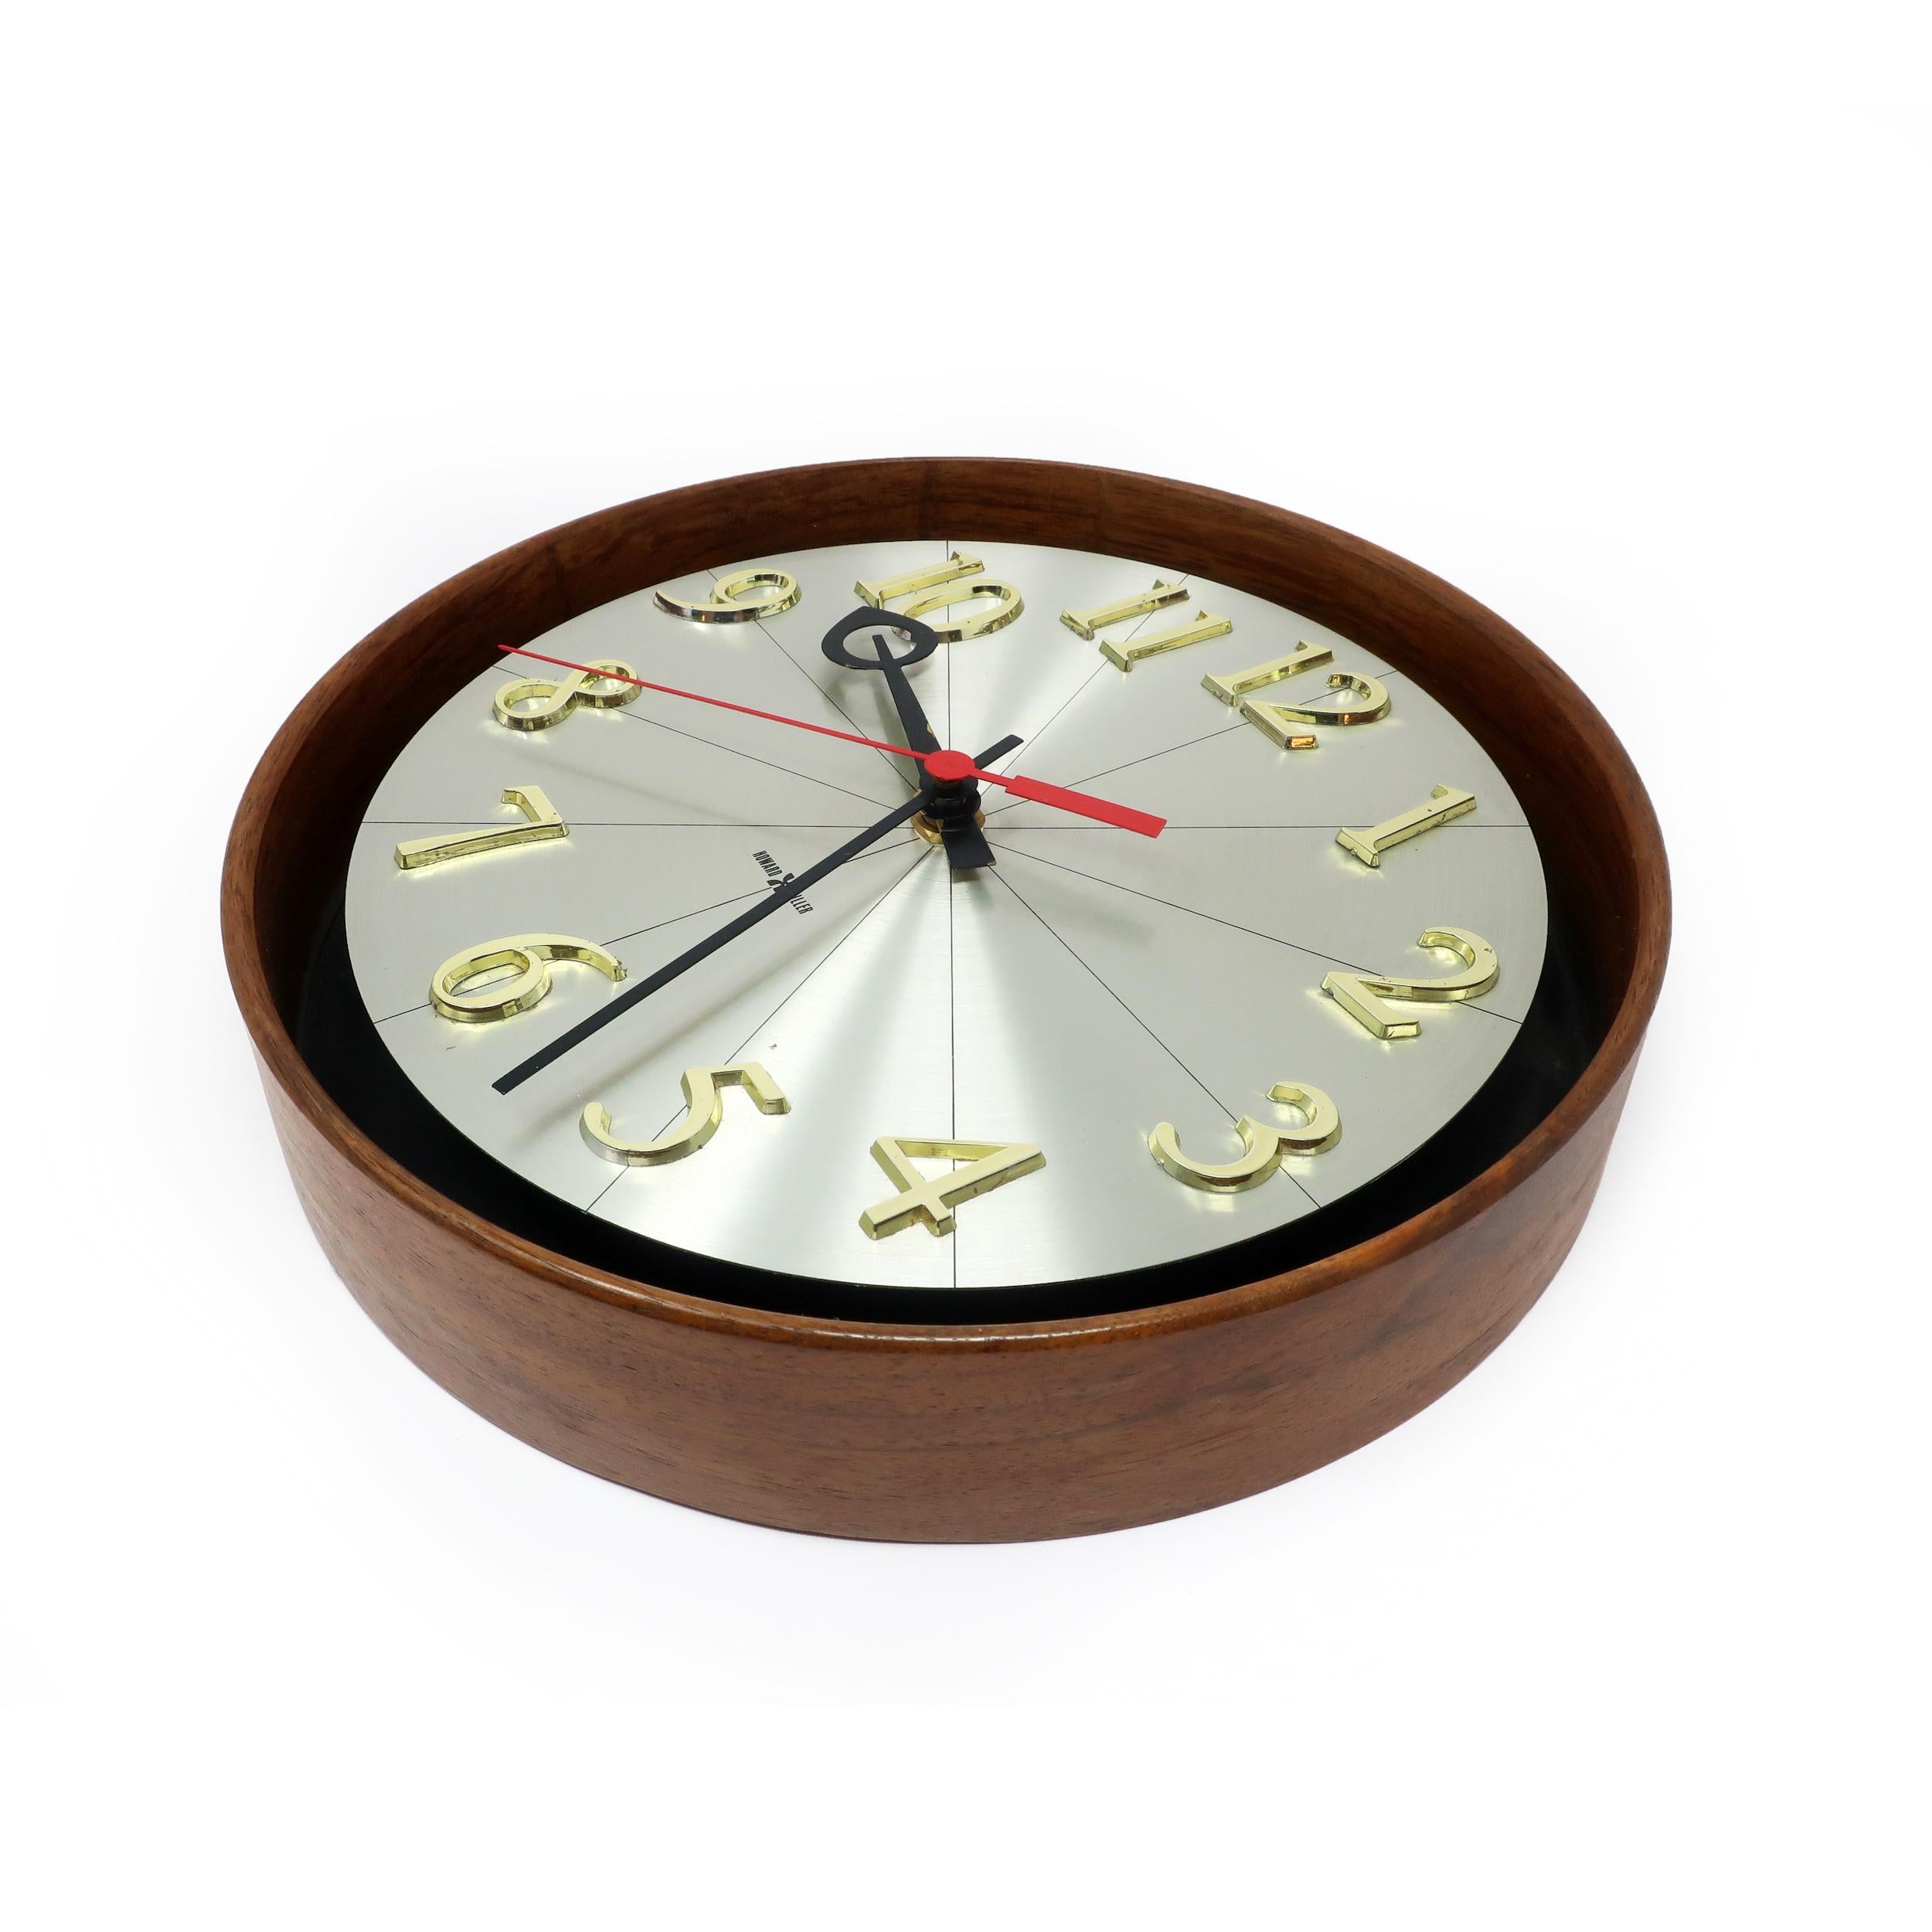 20th Century Mid-Century Modern Wall Clock by Howard Miller For Sale